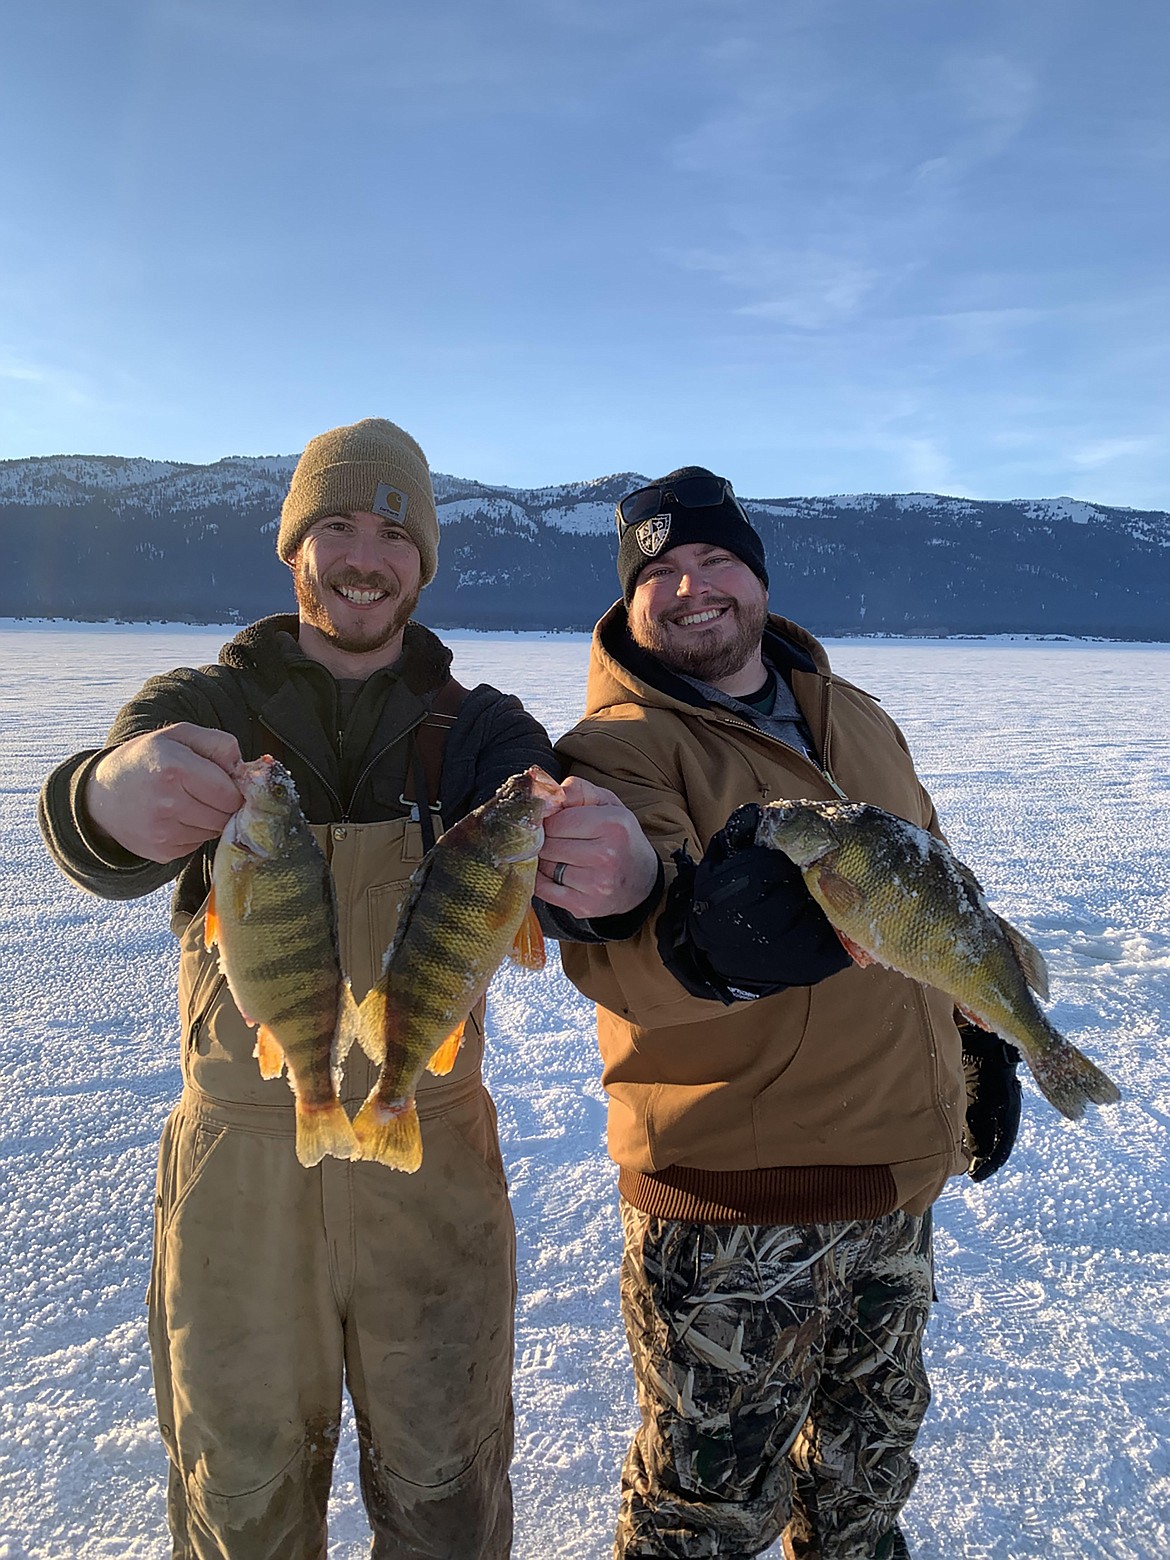 Ice fishermen show off their catch after a recent excursion.